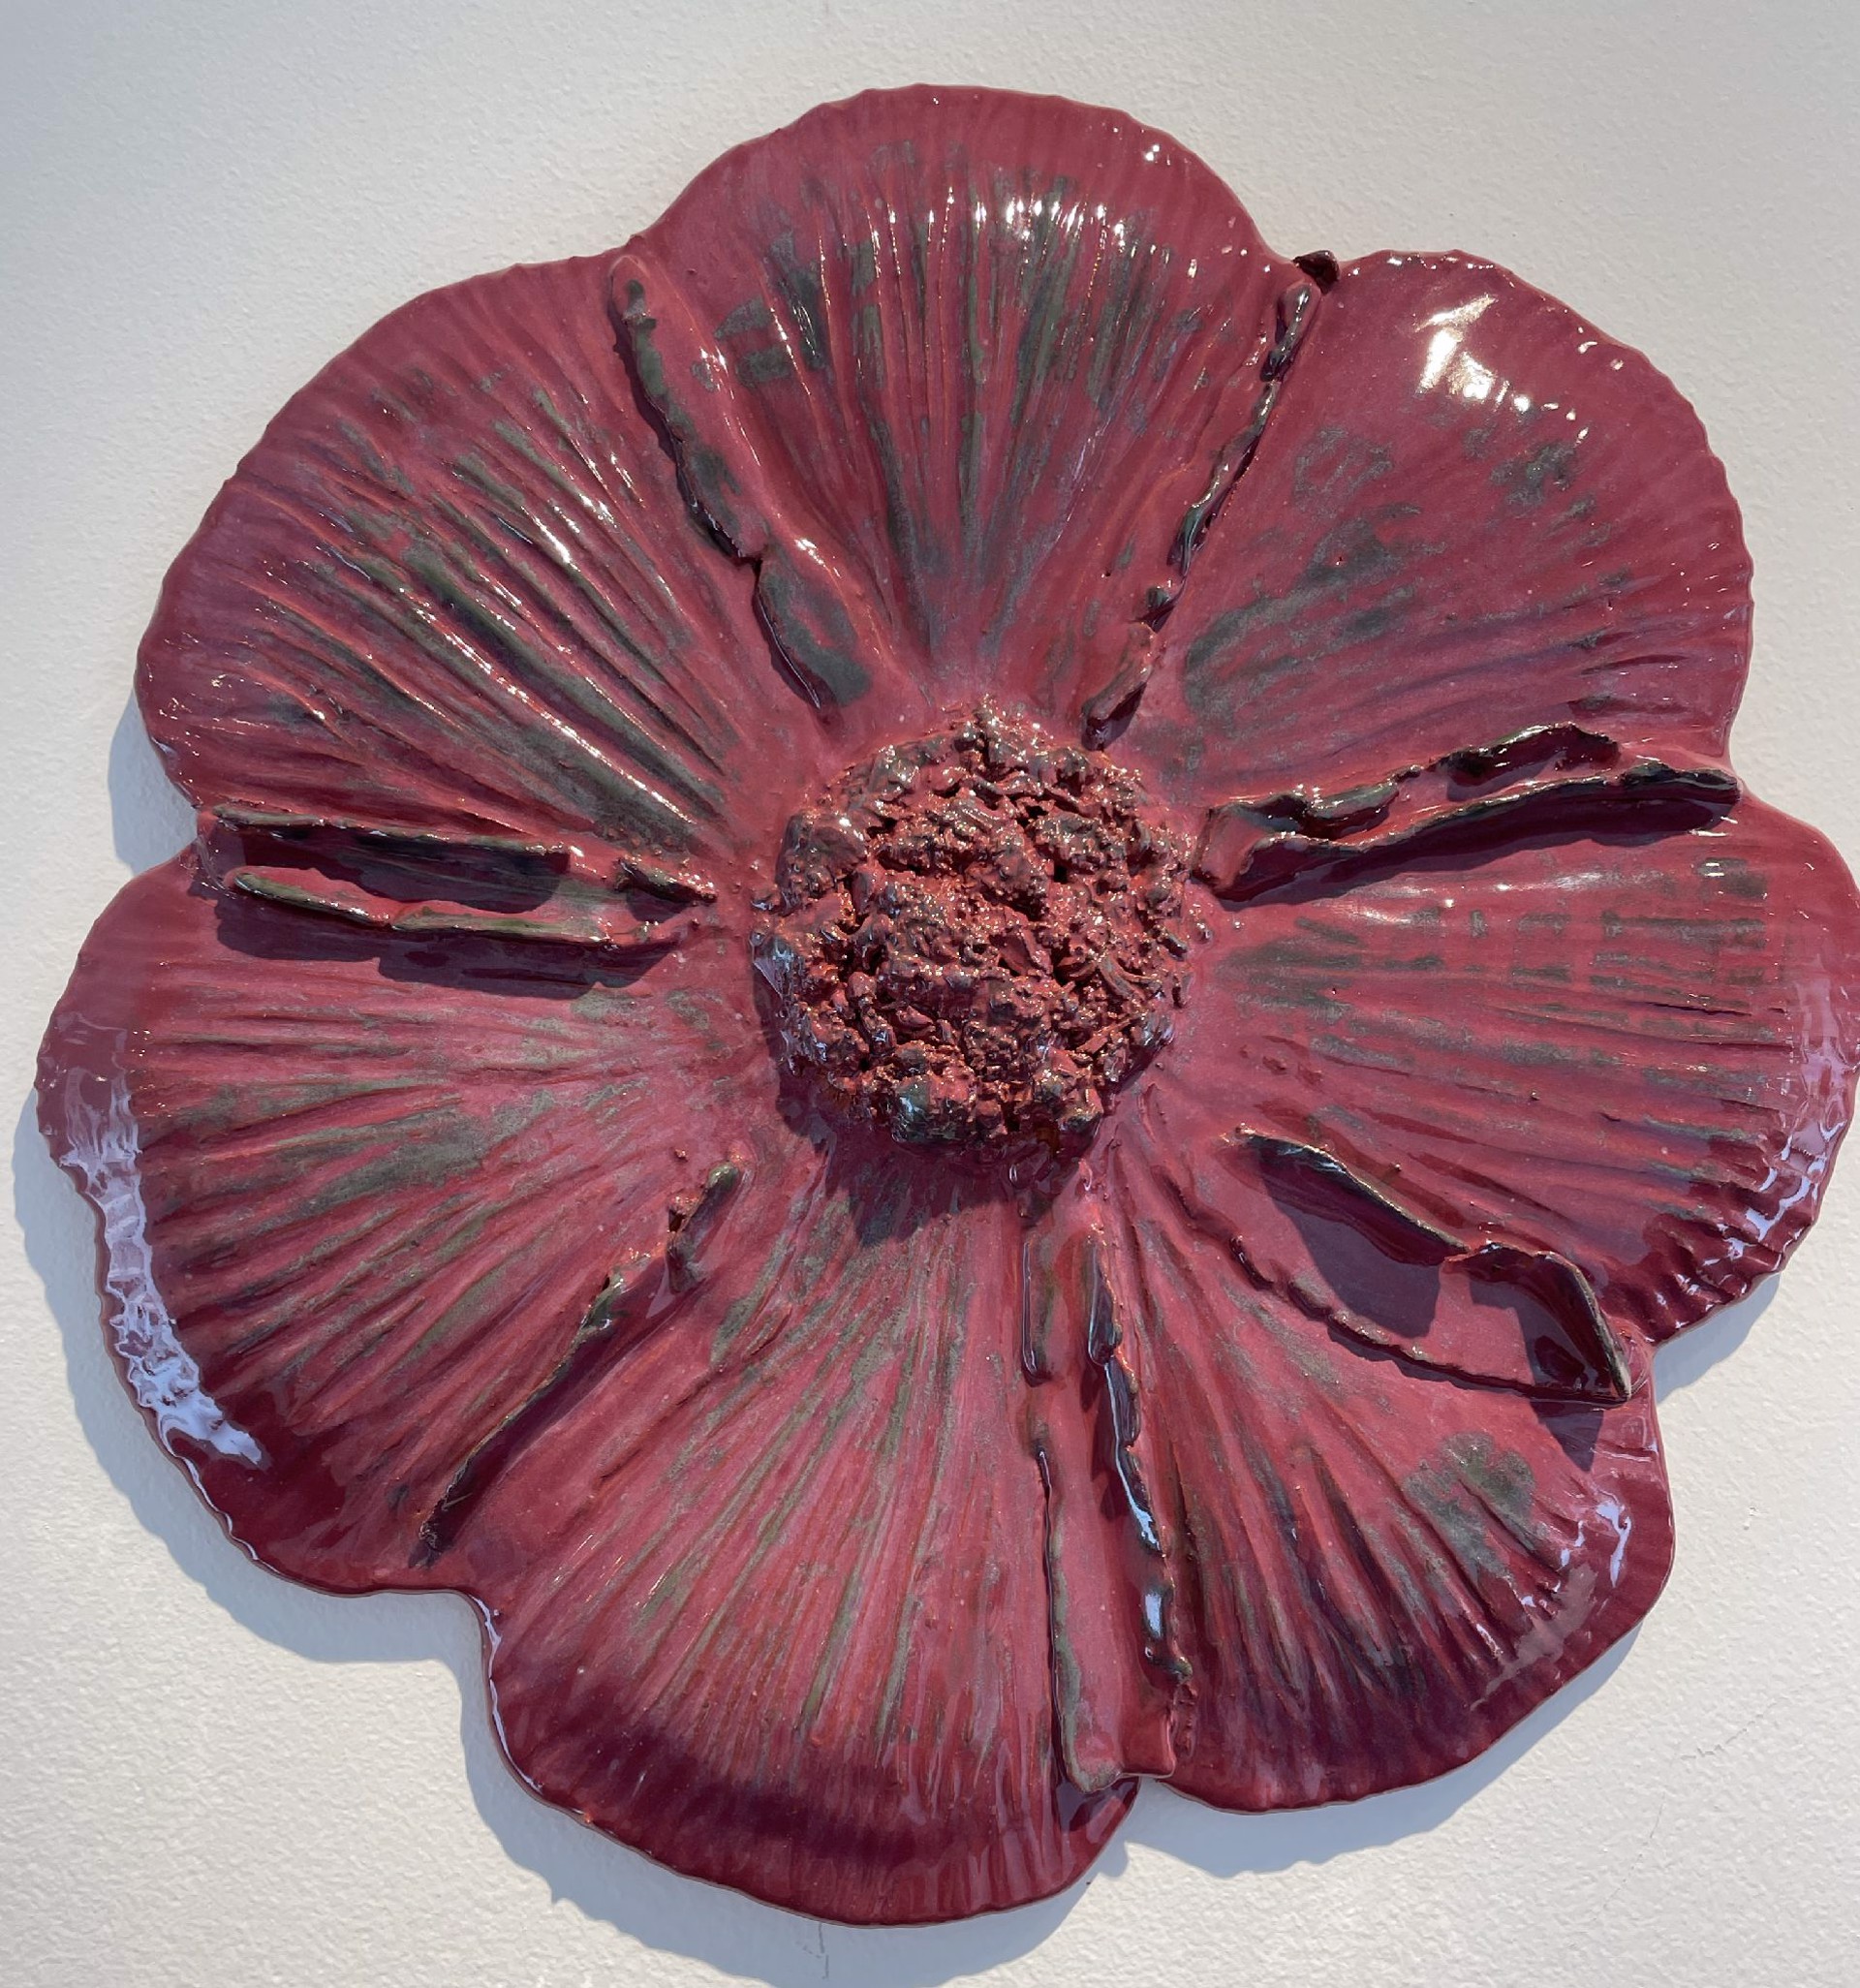 Flower Red/Metallic 12"" by Jill Rothenberg-Simmons